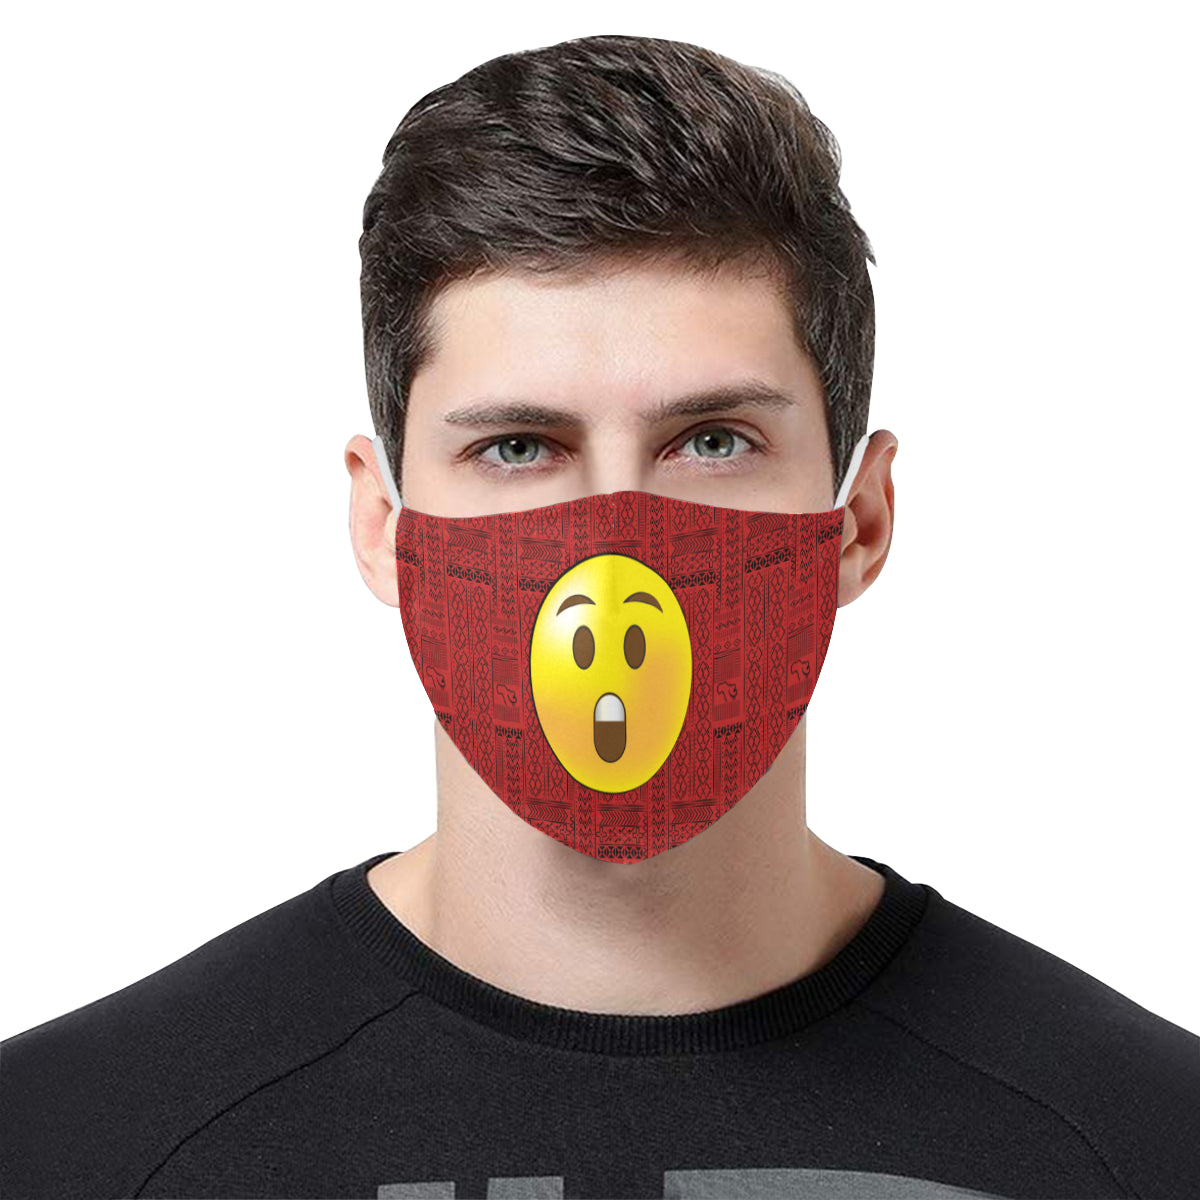 Whaaaaatttt??? Tribal Print Emoji Cotton Fabric Face Mask with Filter Slot and Adjustable Strap - Non-medical use (2 Filters Included)